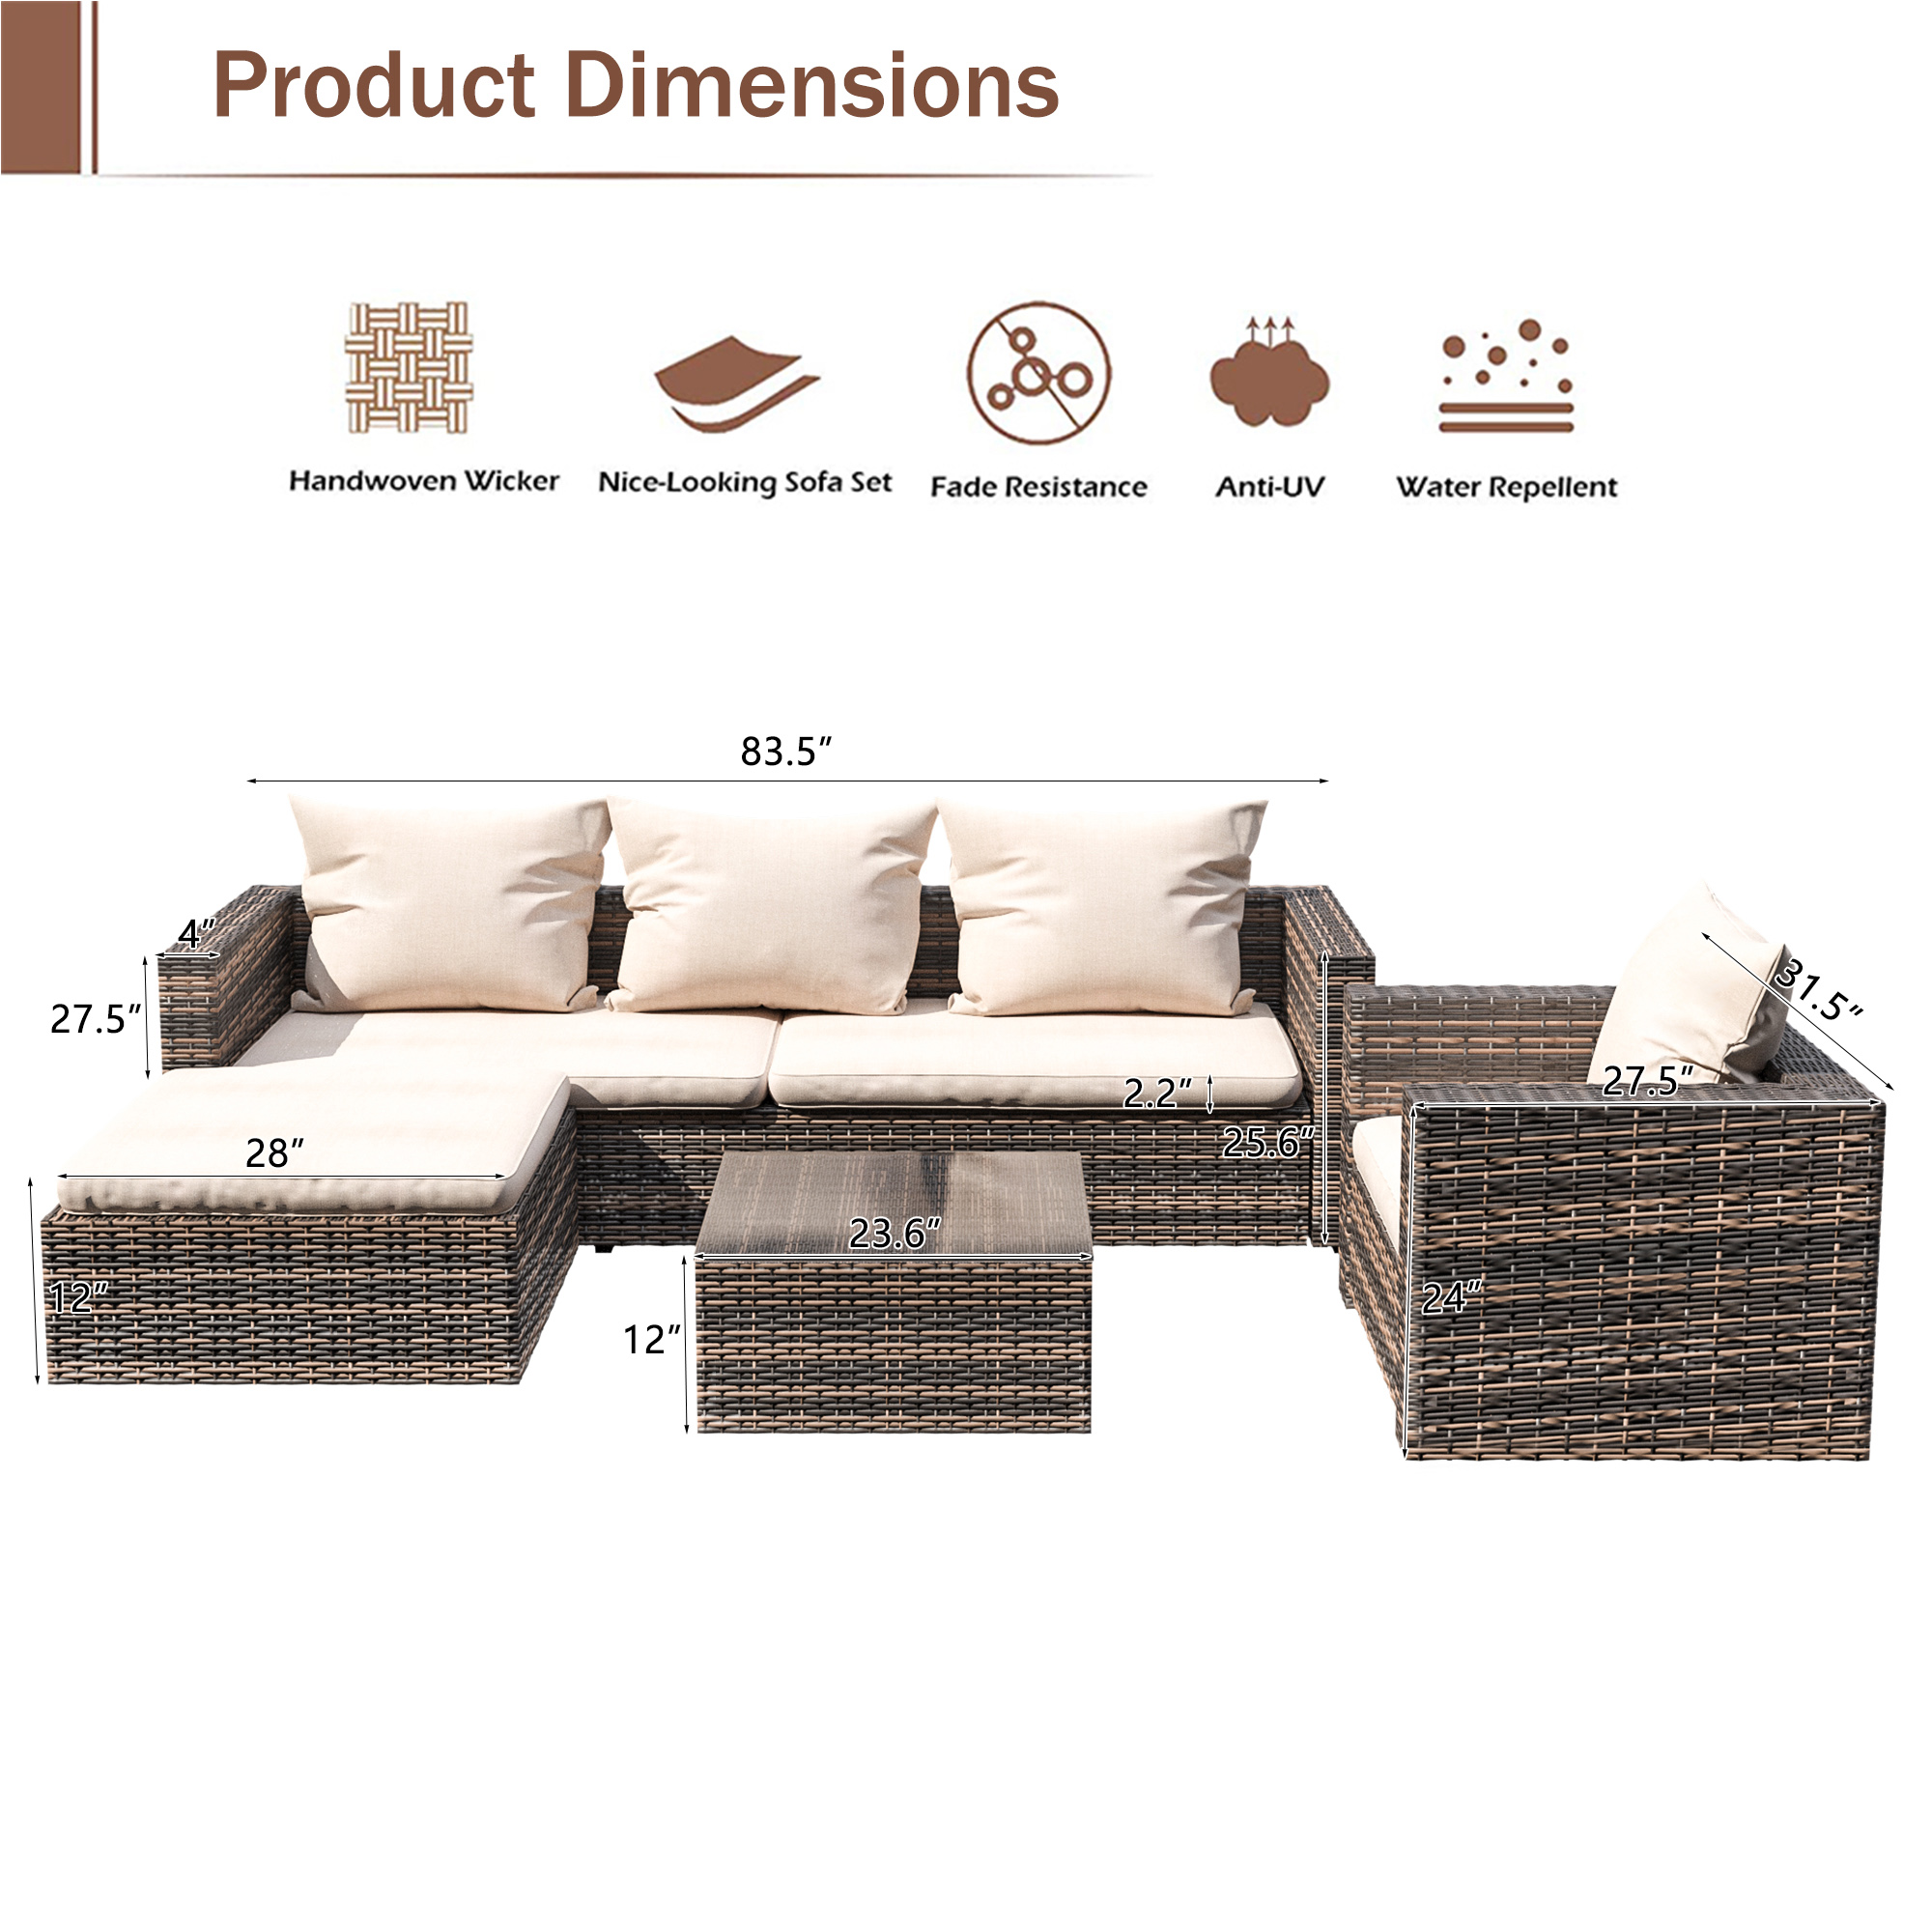 enyopro Rattan Patio Sofa Set, 4 Piece Outdoor Sectional Furniture Set, All-Weather PE Rattan Wicker Patio Conversation Set, Cushioned Sofa Set with Glass Table for Garden Pool Deck Porch, K2829 - image 4 of 10